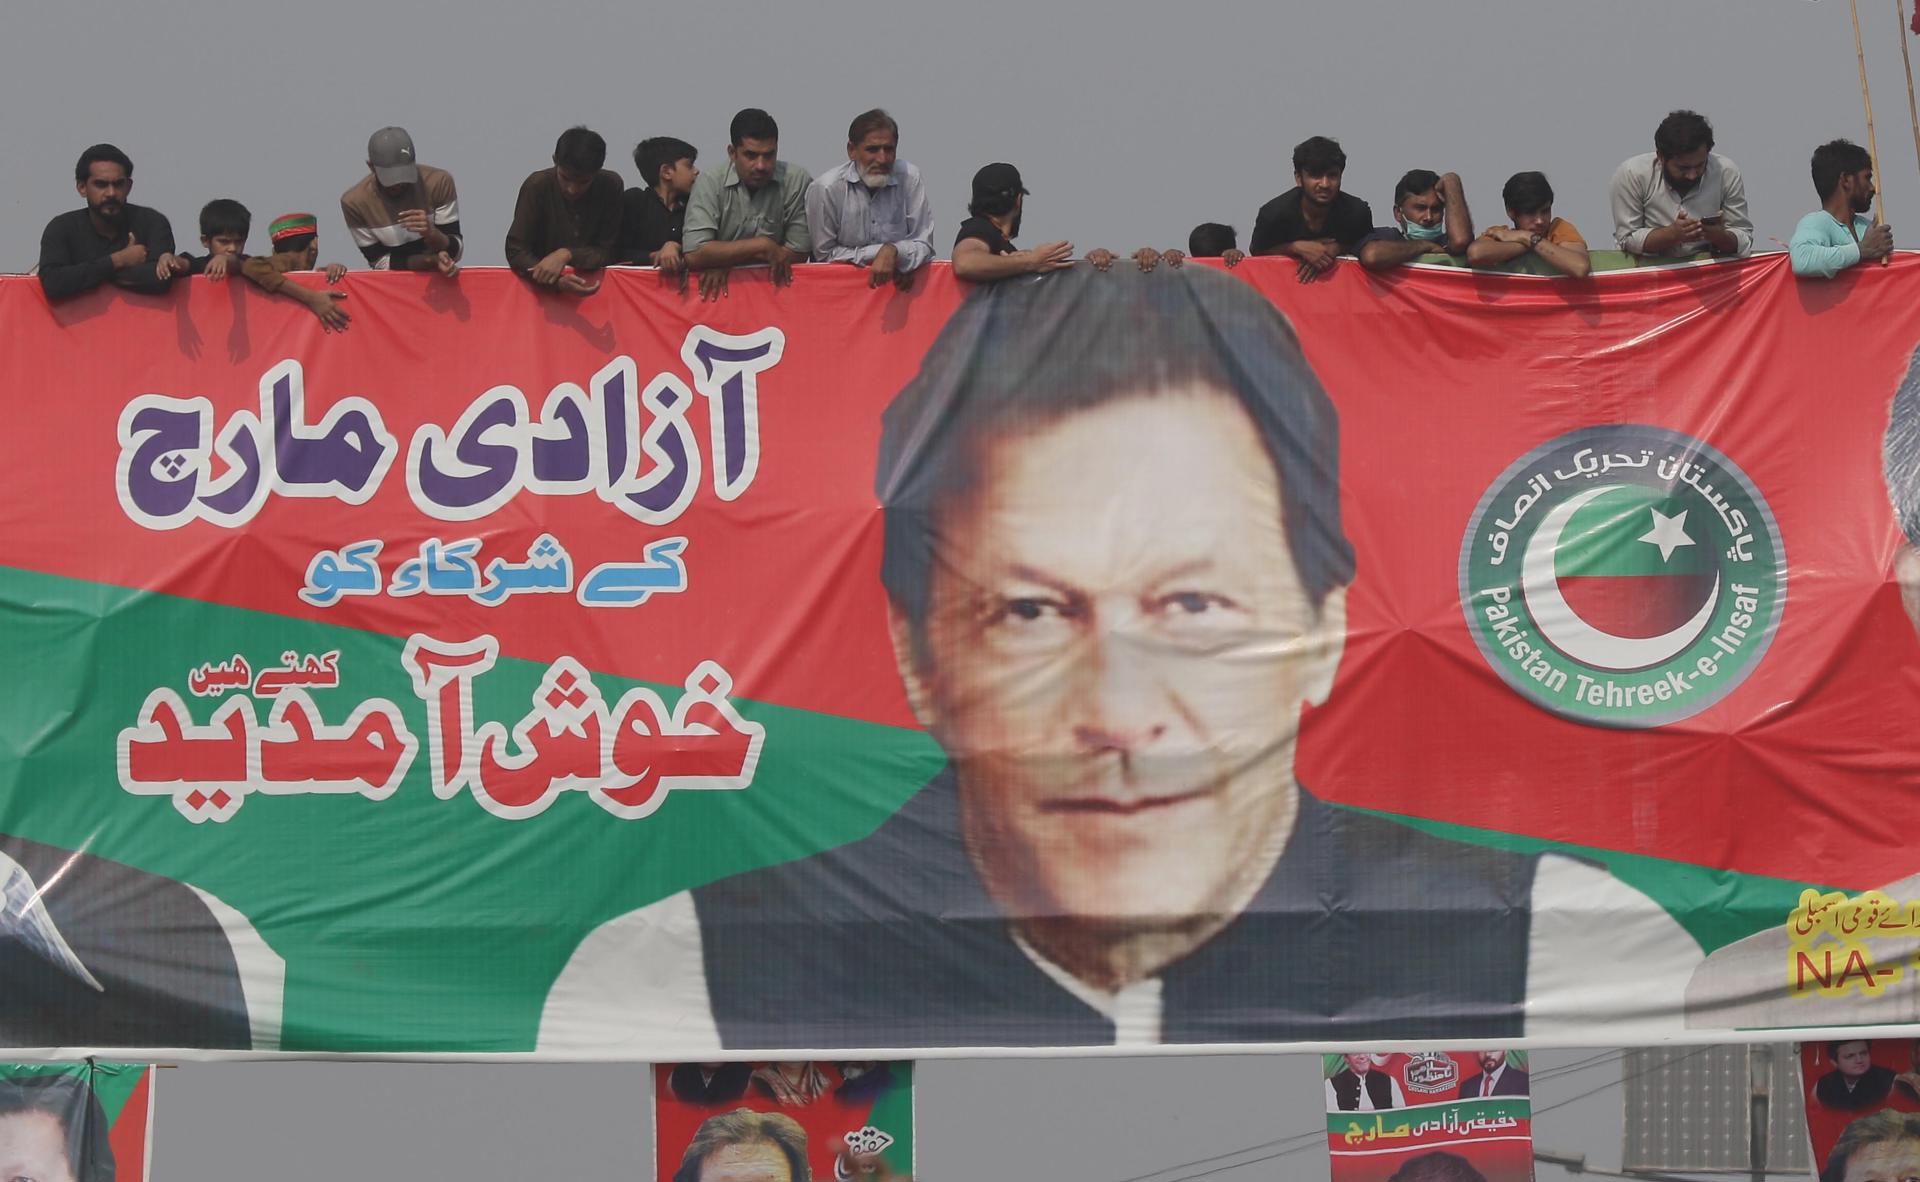 Supporters of Imran Khan, Pakistan's former Prime Minister and head of political party Pakistan Tehreek-e-Insaf (PTI), hold a banner with Khan's face during a protest march towards Islamabad, in Muridke, Pakistan, 30 October 2022. EFE/EPA/FILE/RAHAT DAR 1582